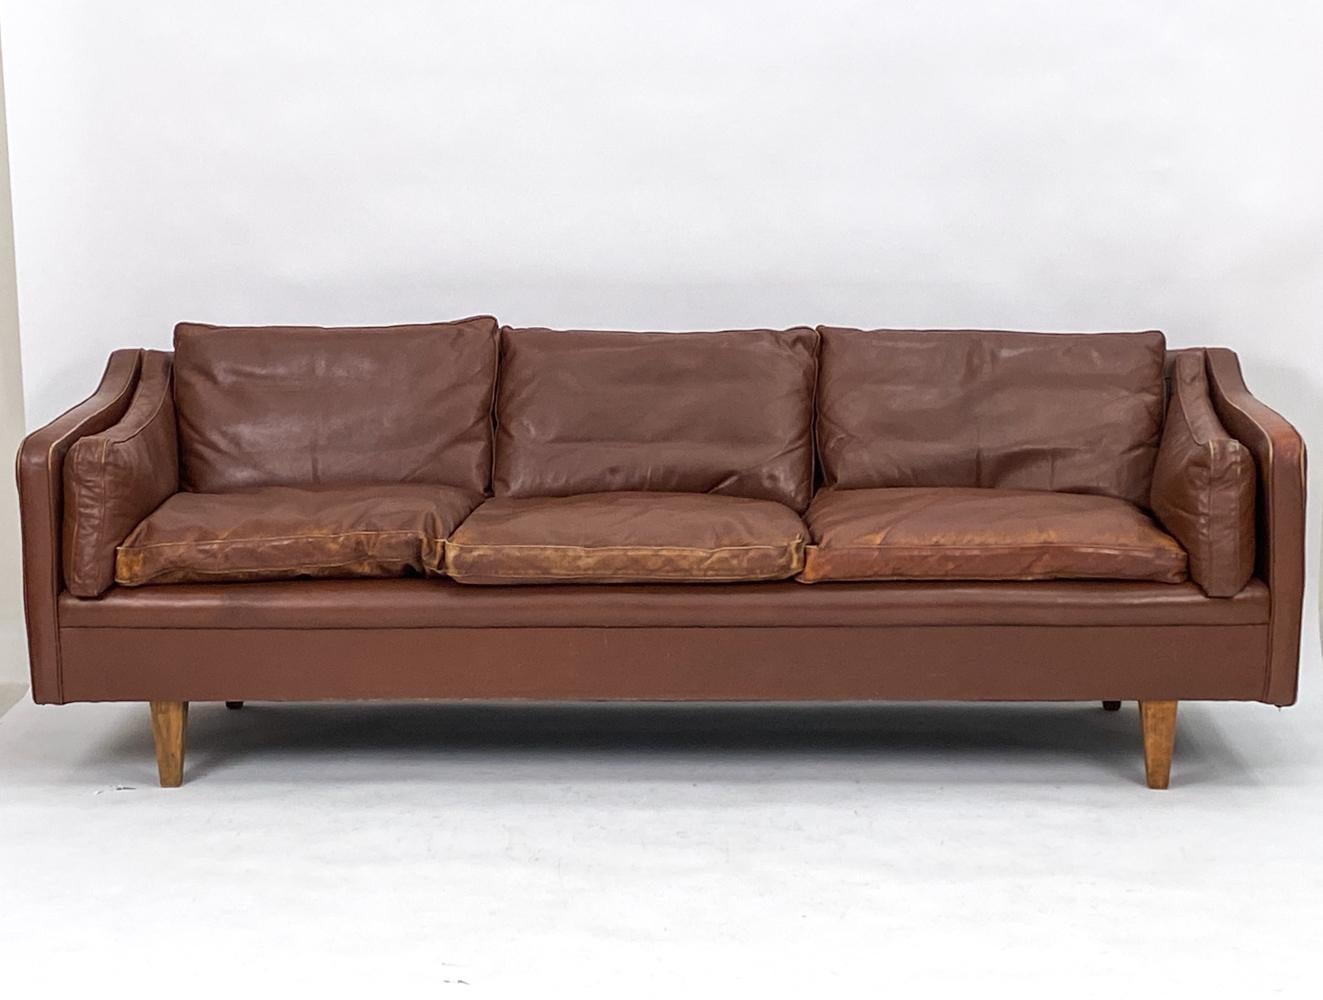 A fabulous Danish mid-century three-seater sofa in rich brown handsomely patinated leather. Attributed to Illum Wikkelso, this Scandinavian modern sofa has an attractive refined design with gently sloping armrests and triangular legs in teak wood,